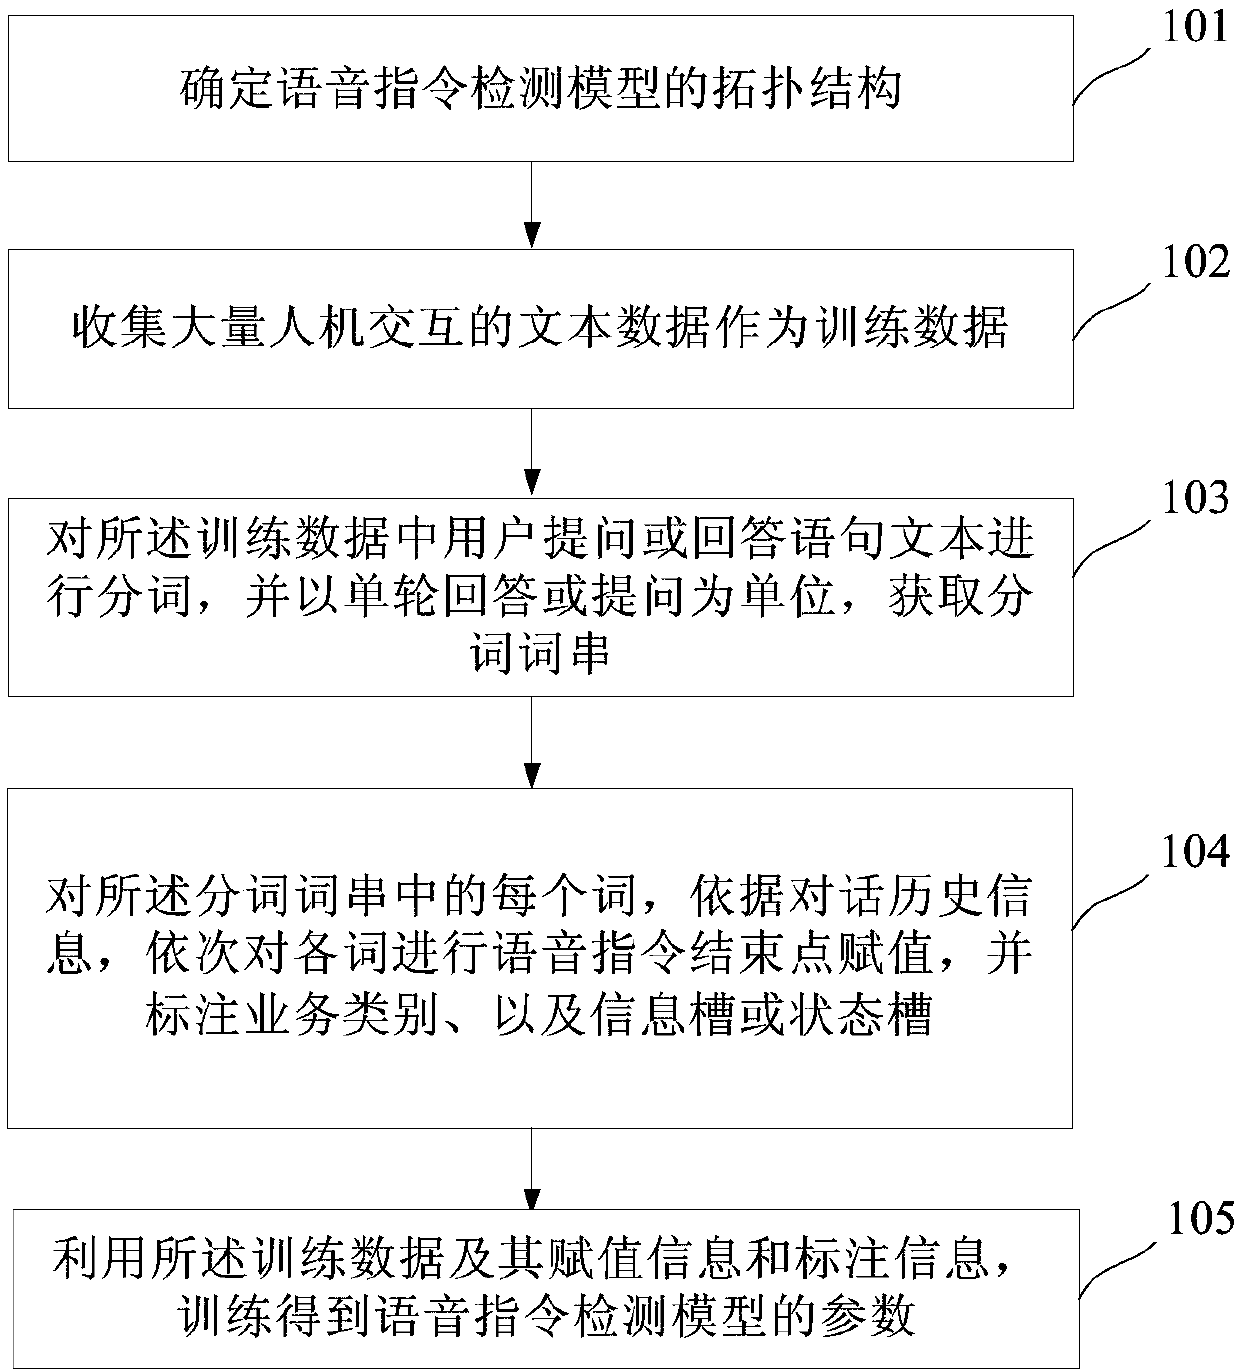 Voice command detection model constructing method, detection method and system, man-machine interaction method and device